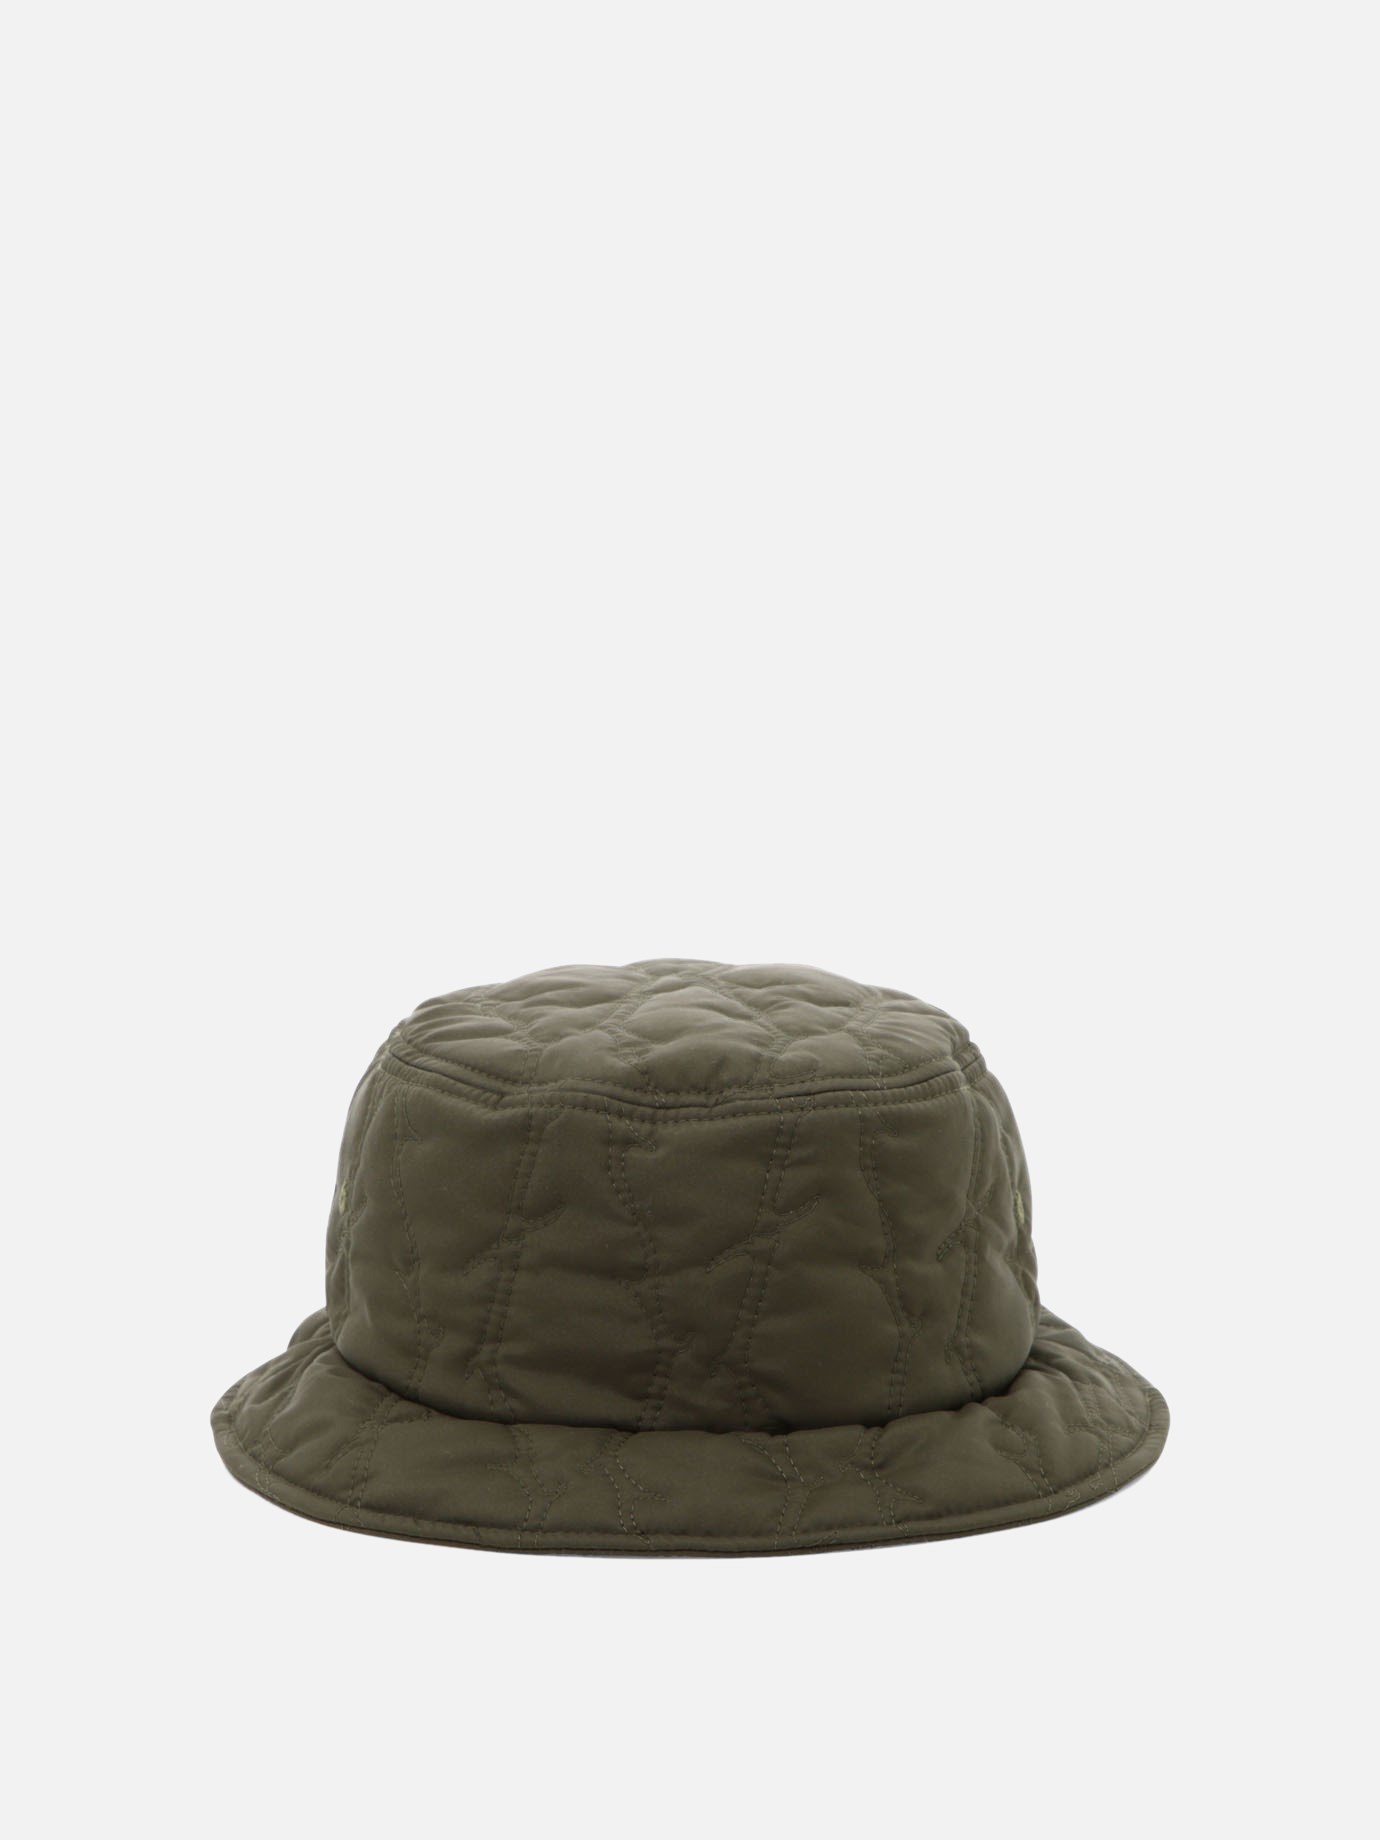 Cappello bucket trapuntatoby South2 West8 - 3